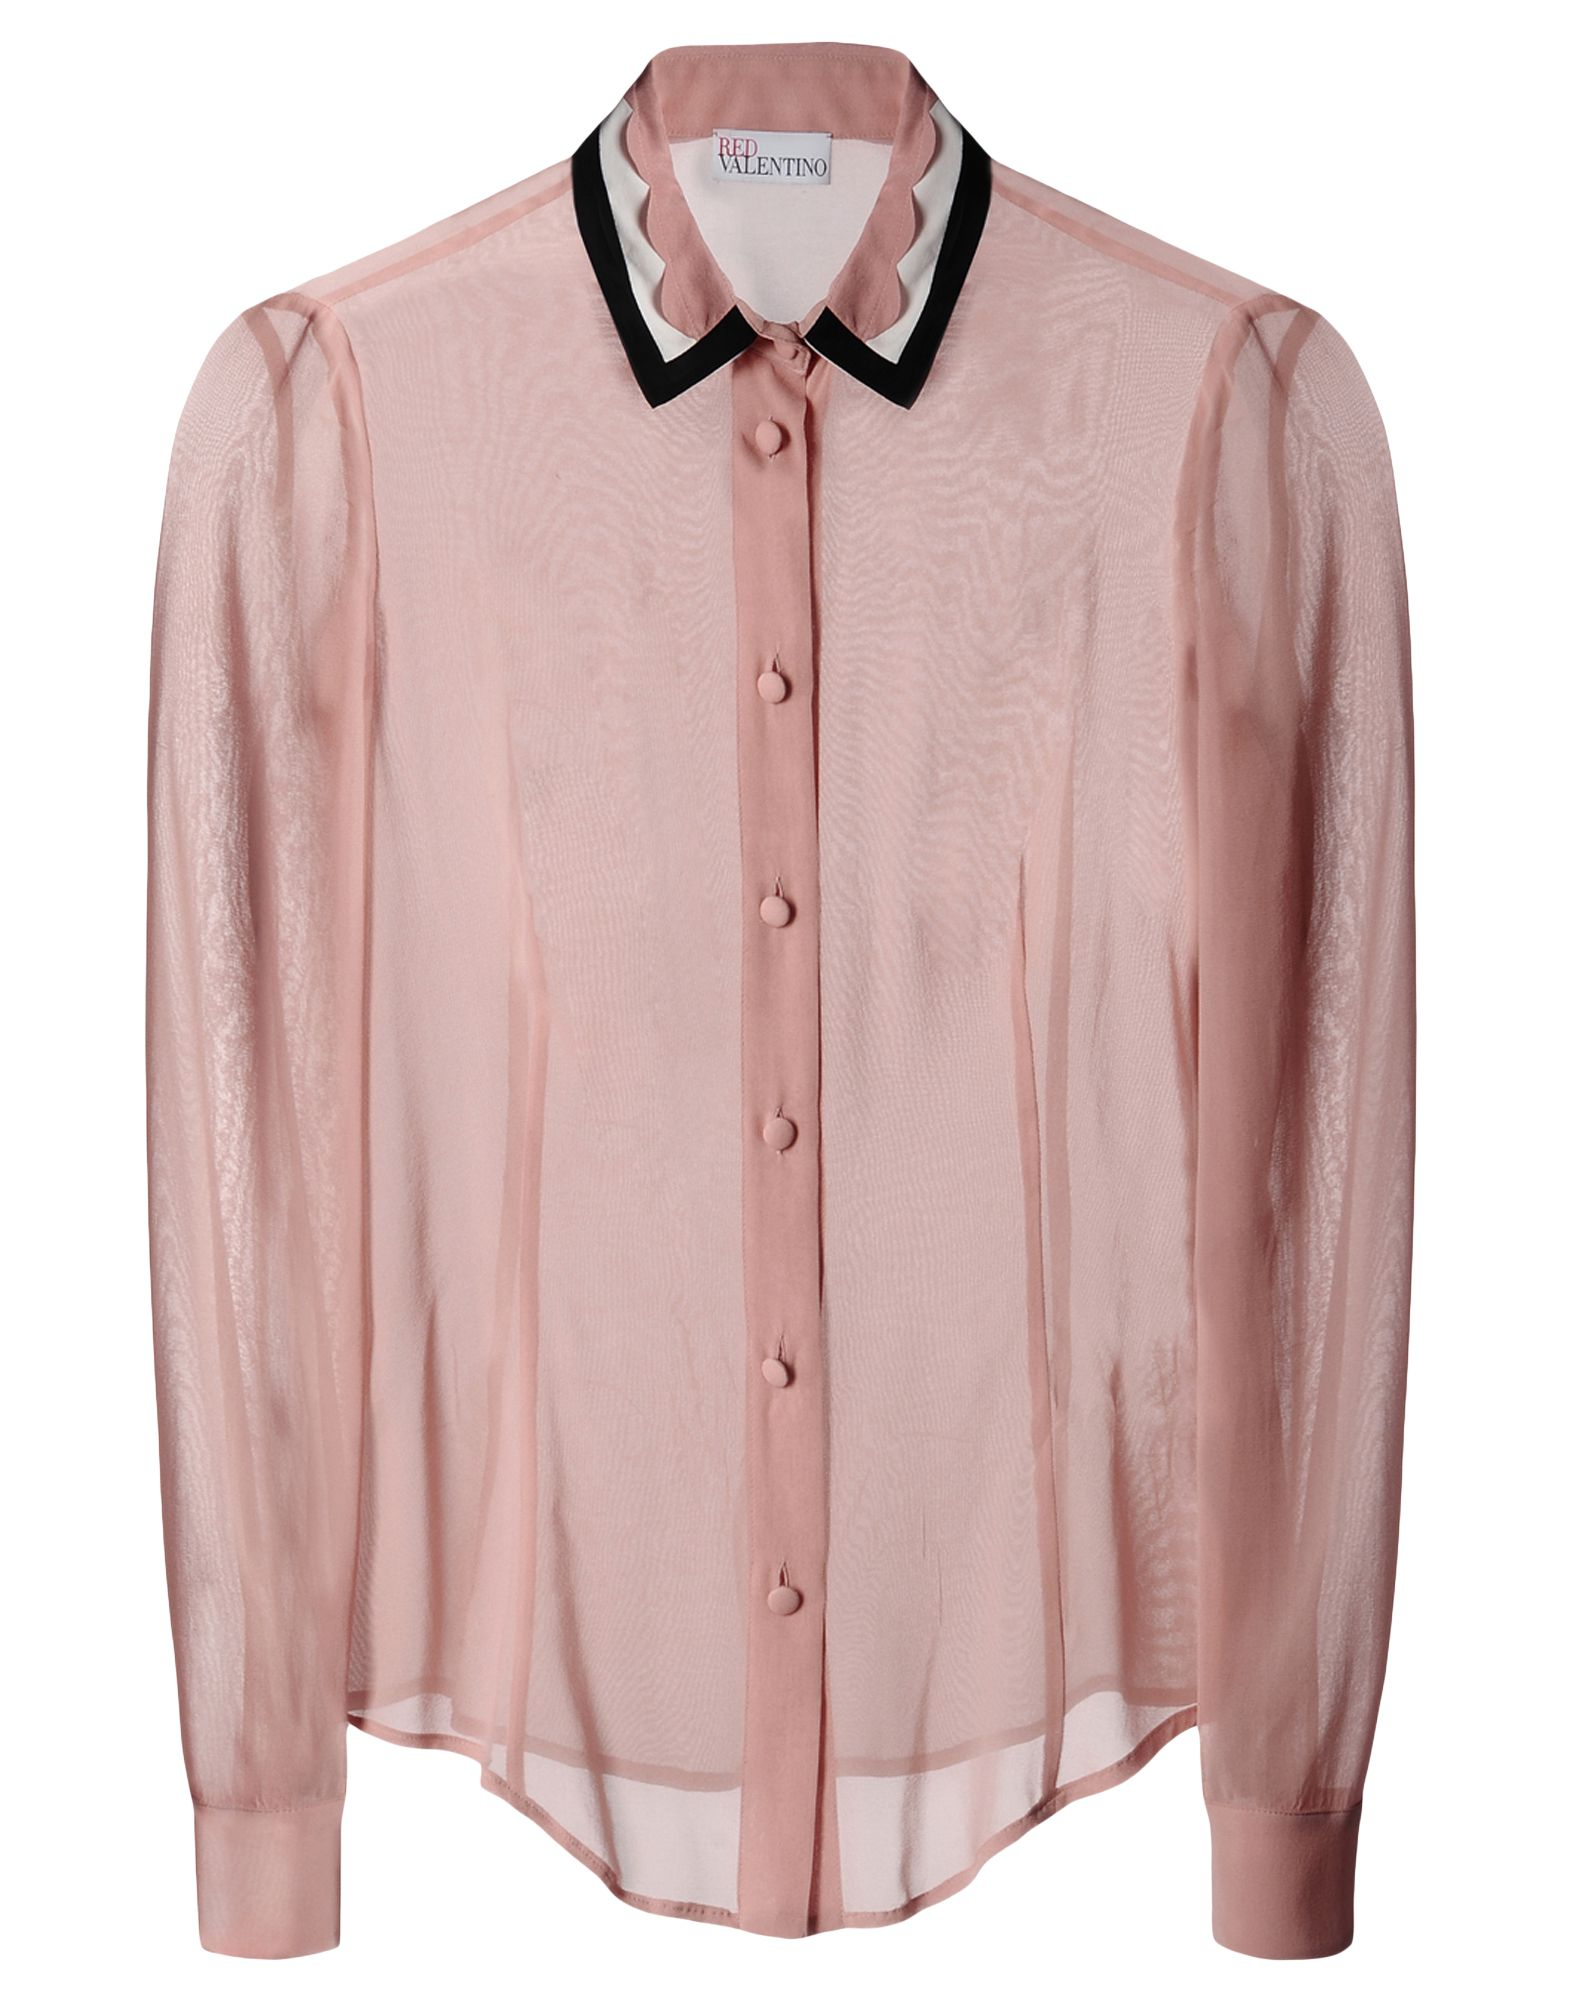 Redvalentino Scalloped Collar Silk Shirt in Pink (Skin color) | Lyst